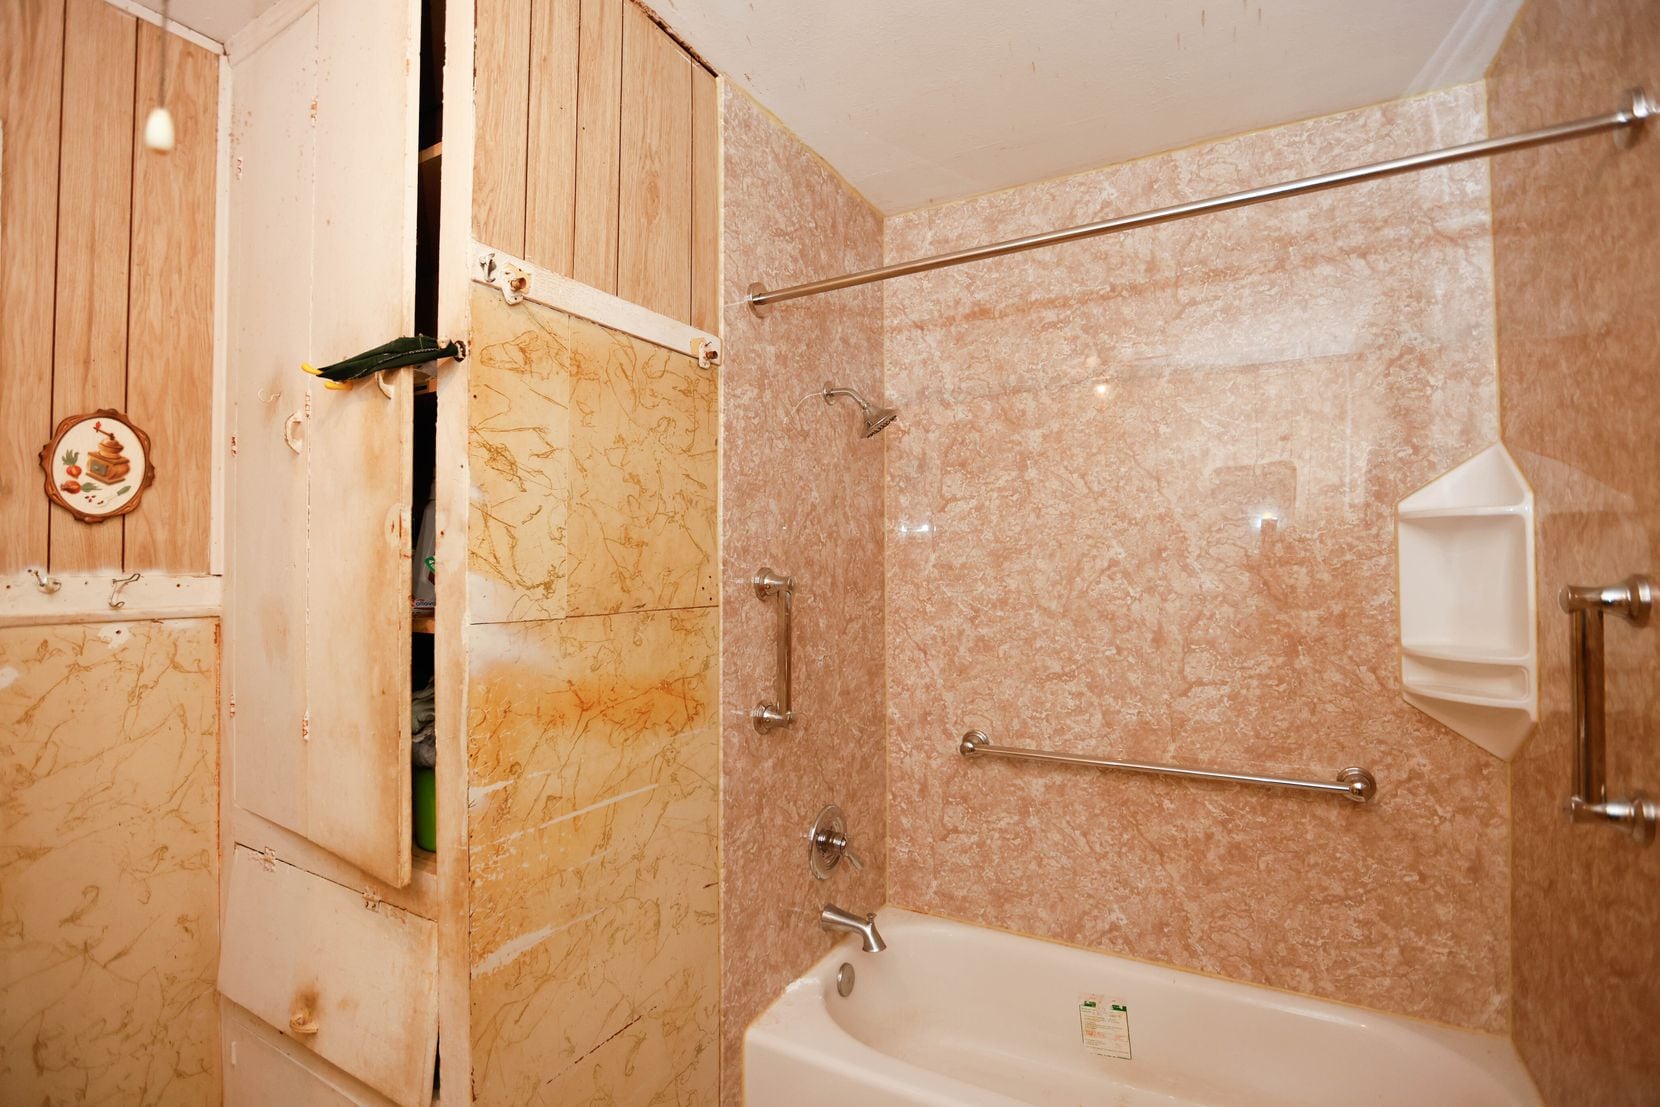 Mary Ann Dean's bathroom was partly remodeled by a company affiliated with Home Depot. She...